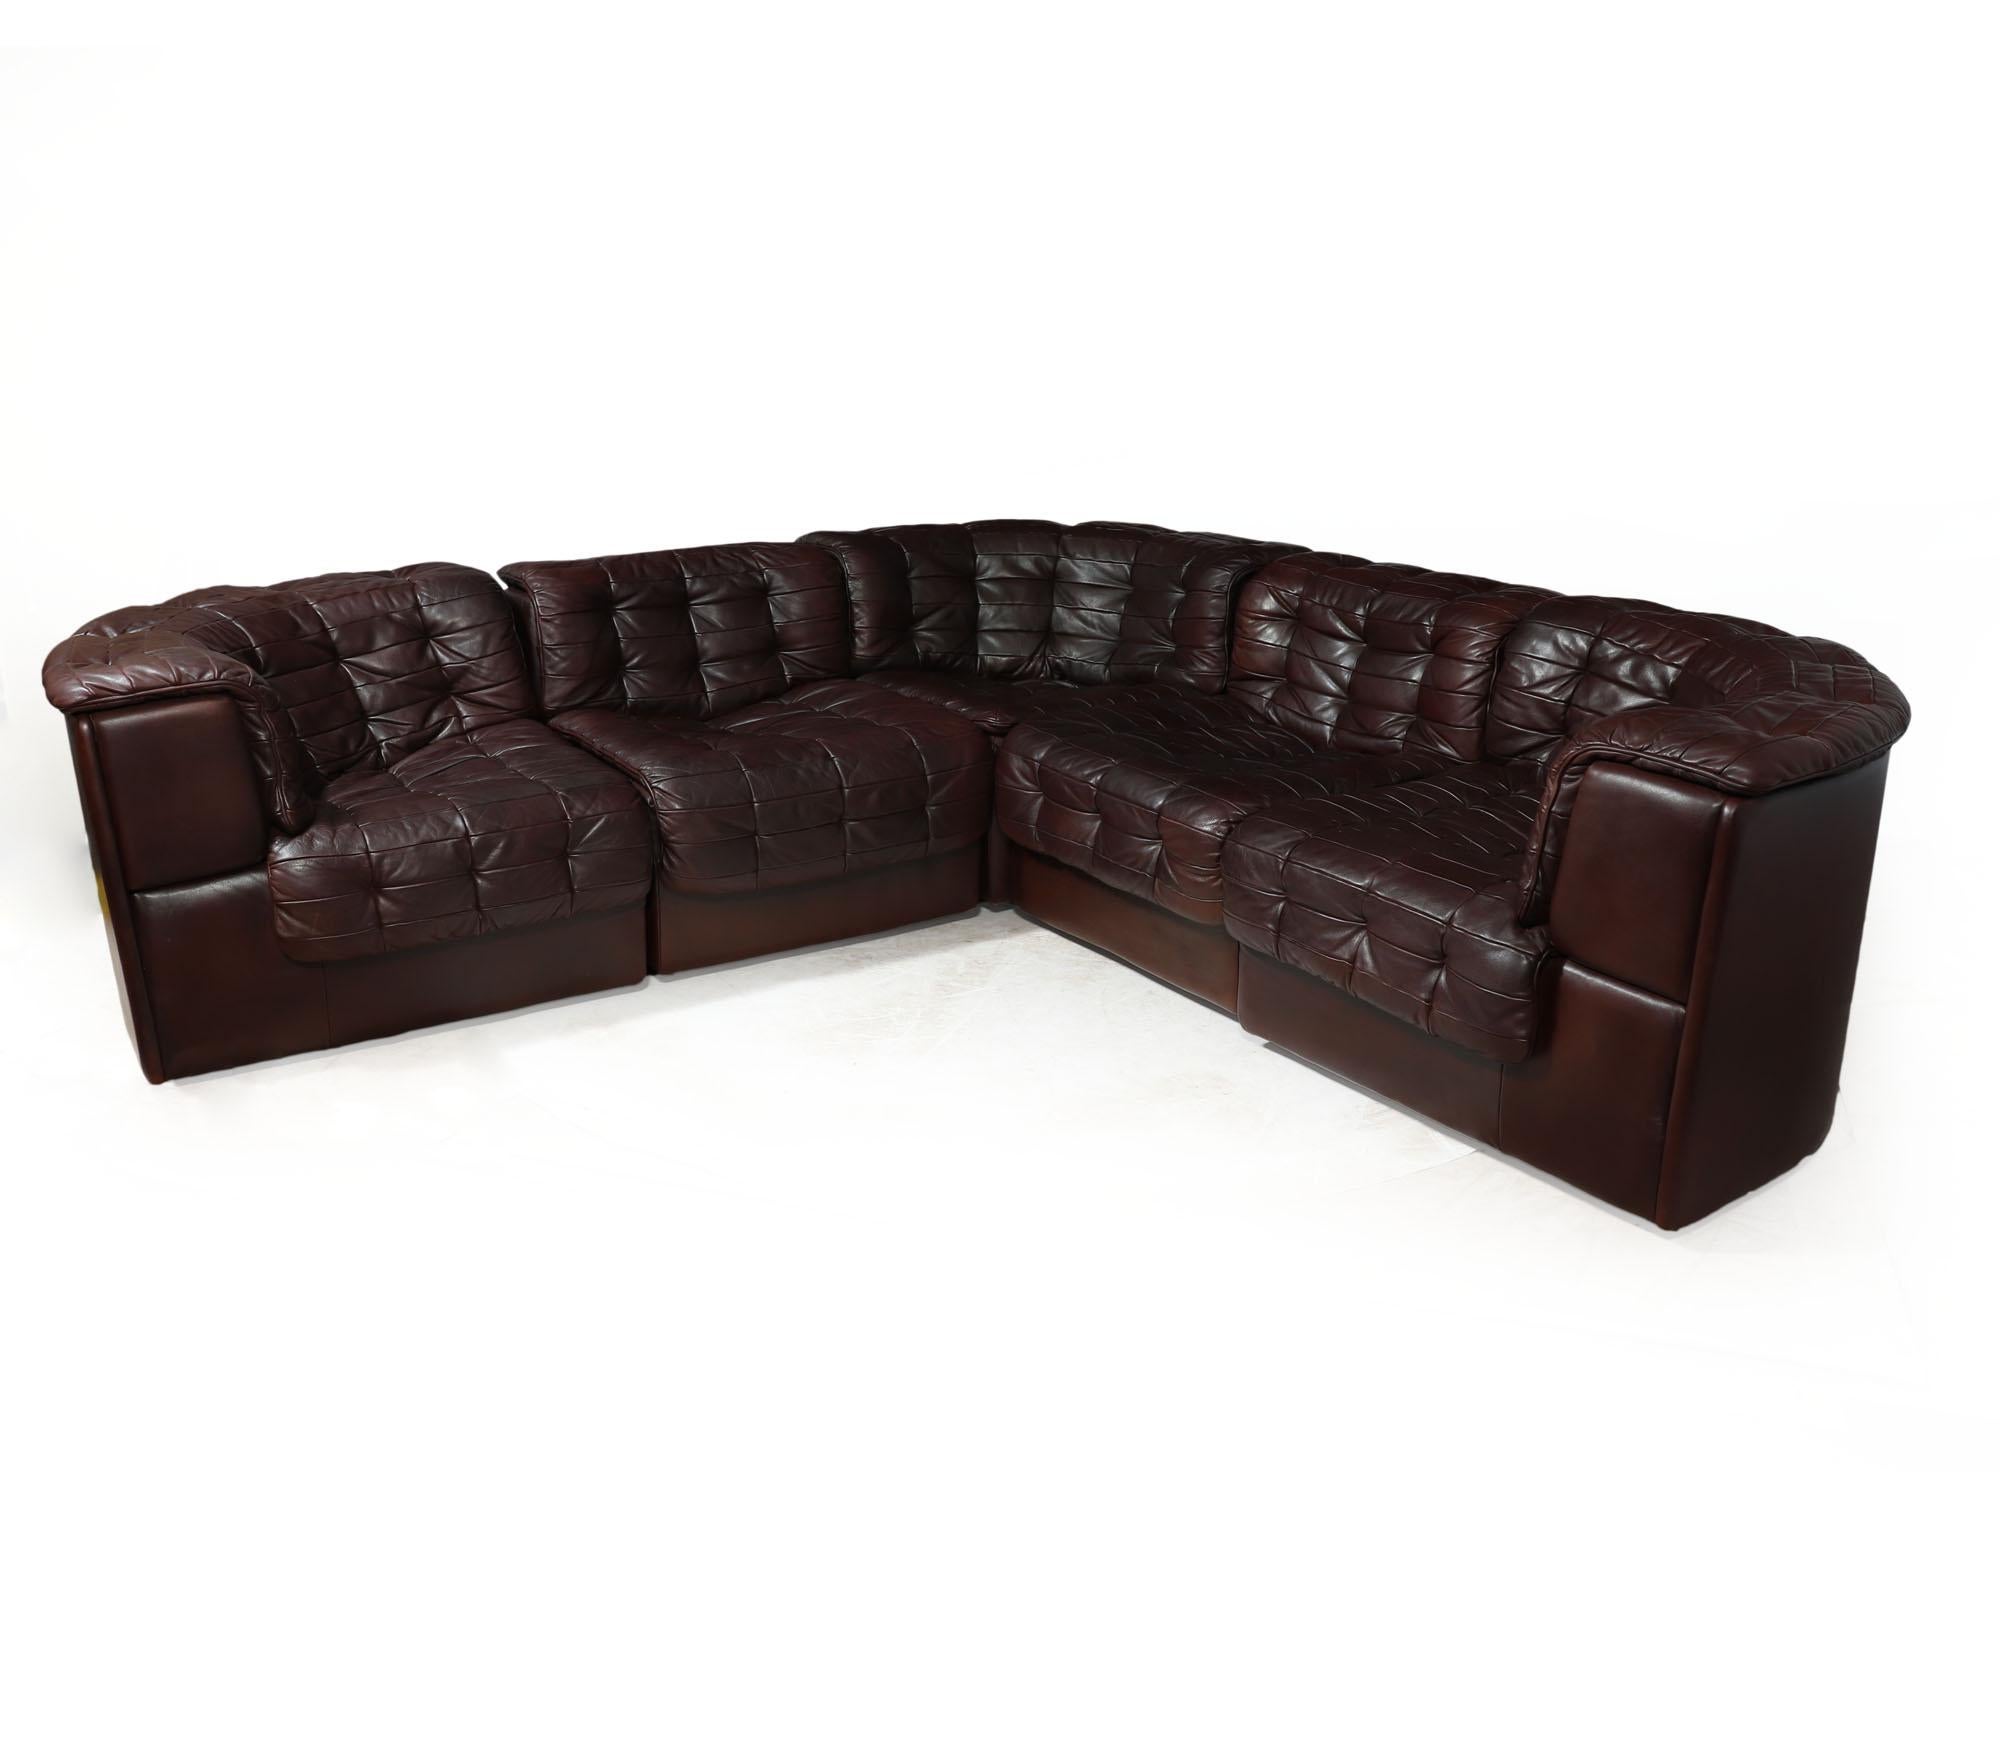 DE SEDE - DS11 
Manufactured in the 1970s by the esteemed sofa makers De Sede, this modular corner sofa showcases a unique patchwork leather design, featuring one corner element, two seating elements, and two end elements. Crafted in rich brown